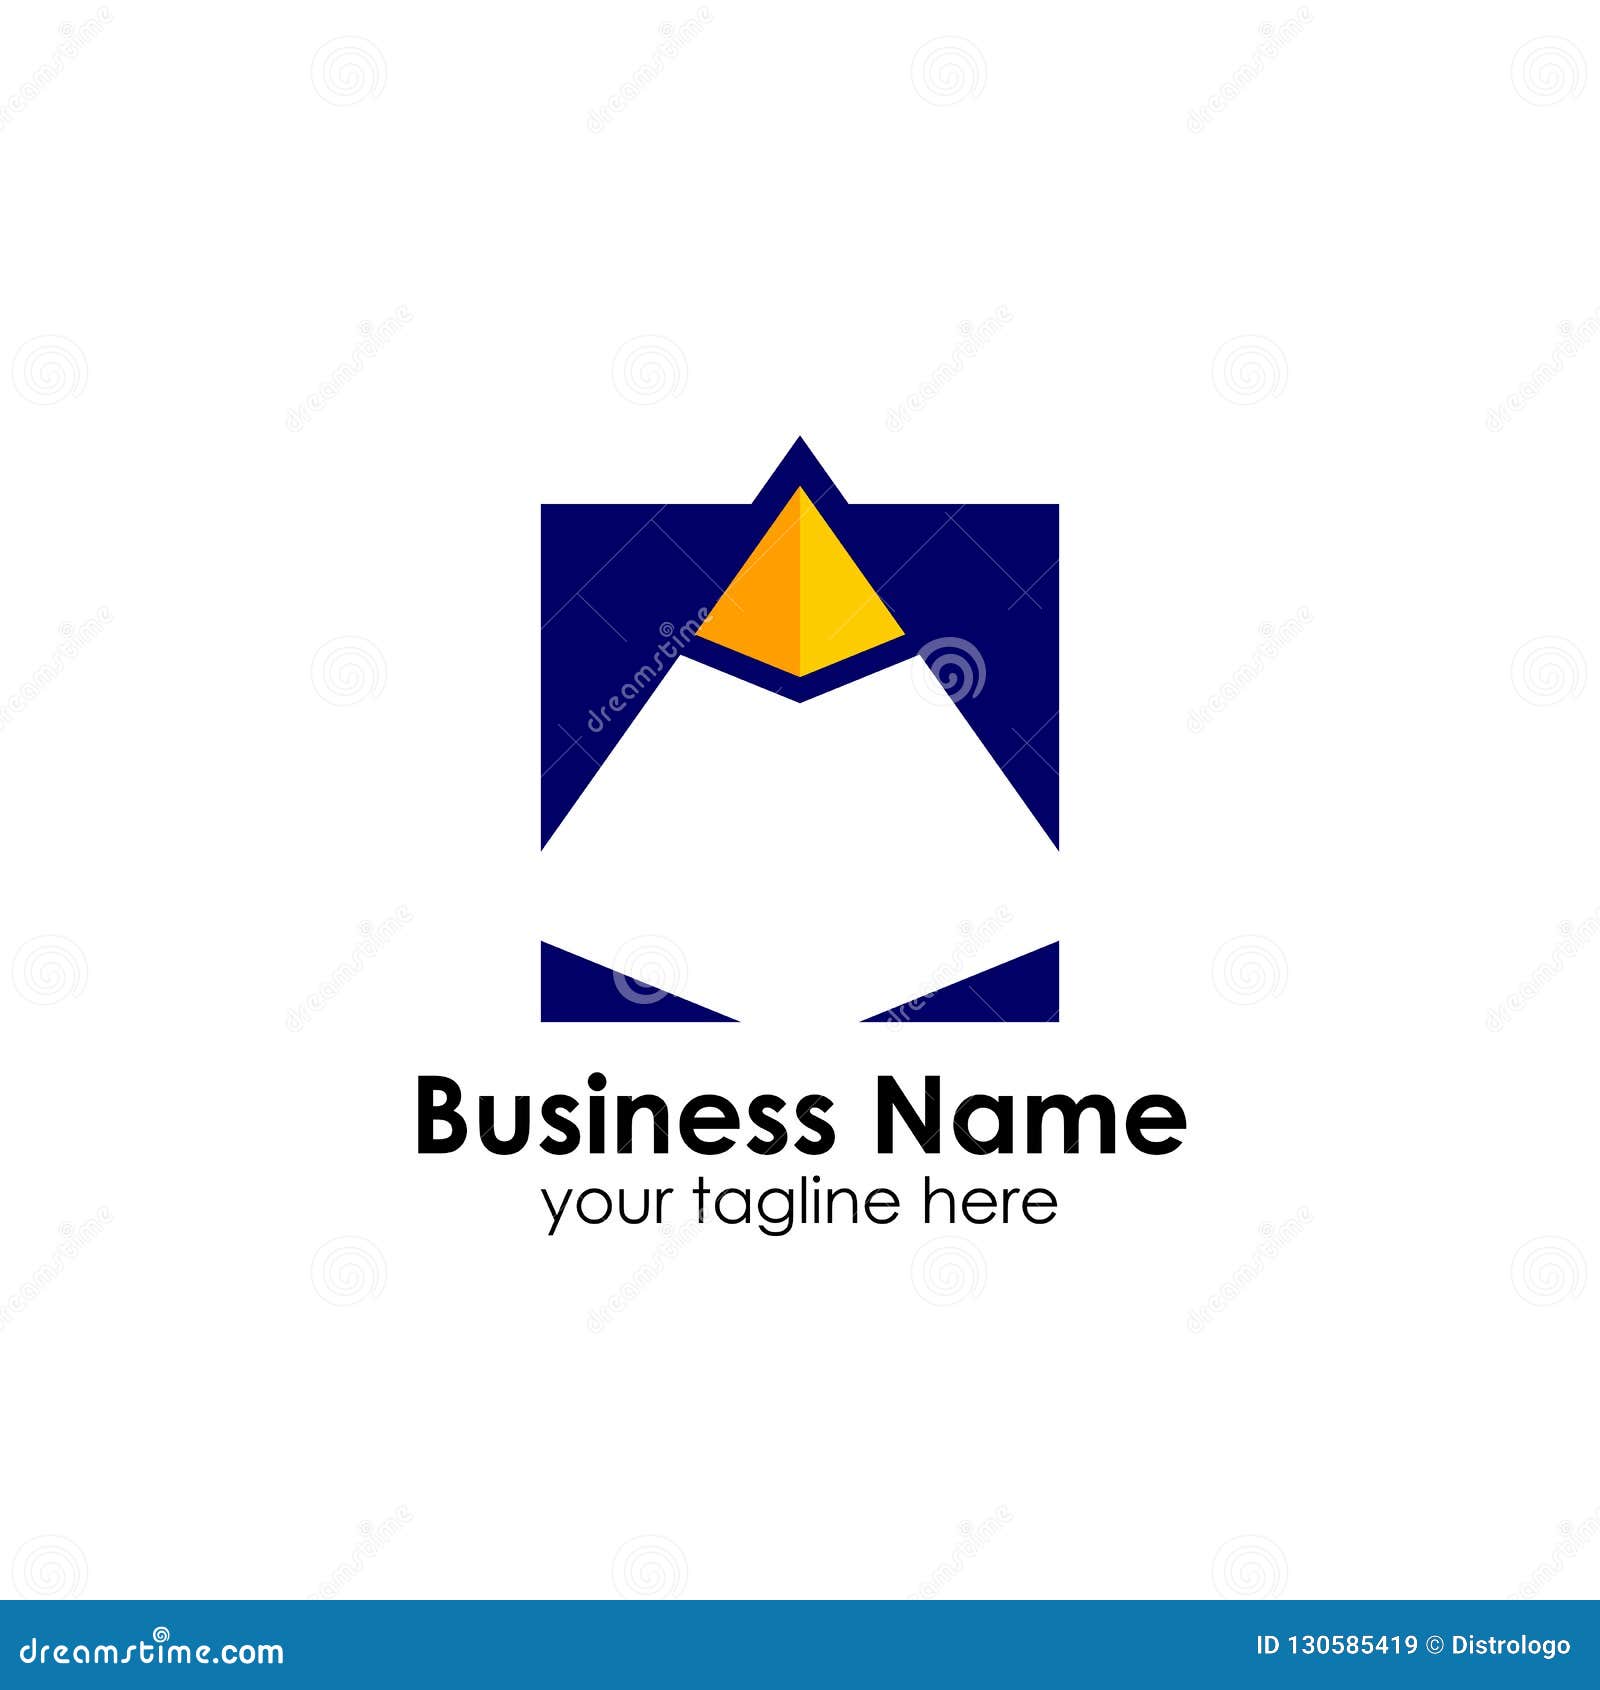 Business Pyramid Logo Design Template Business Marketing And